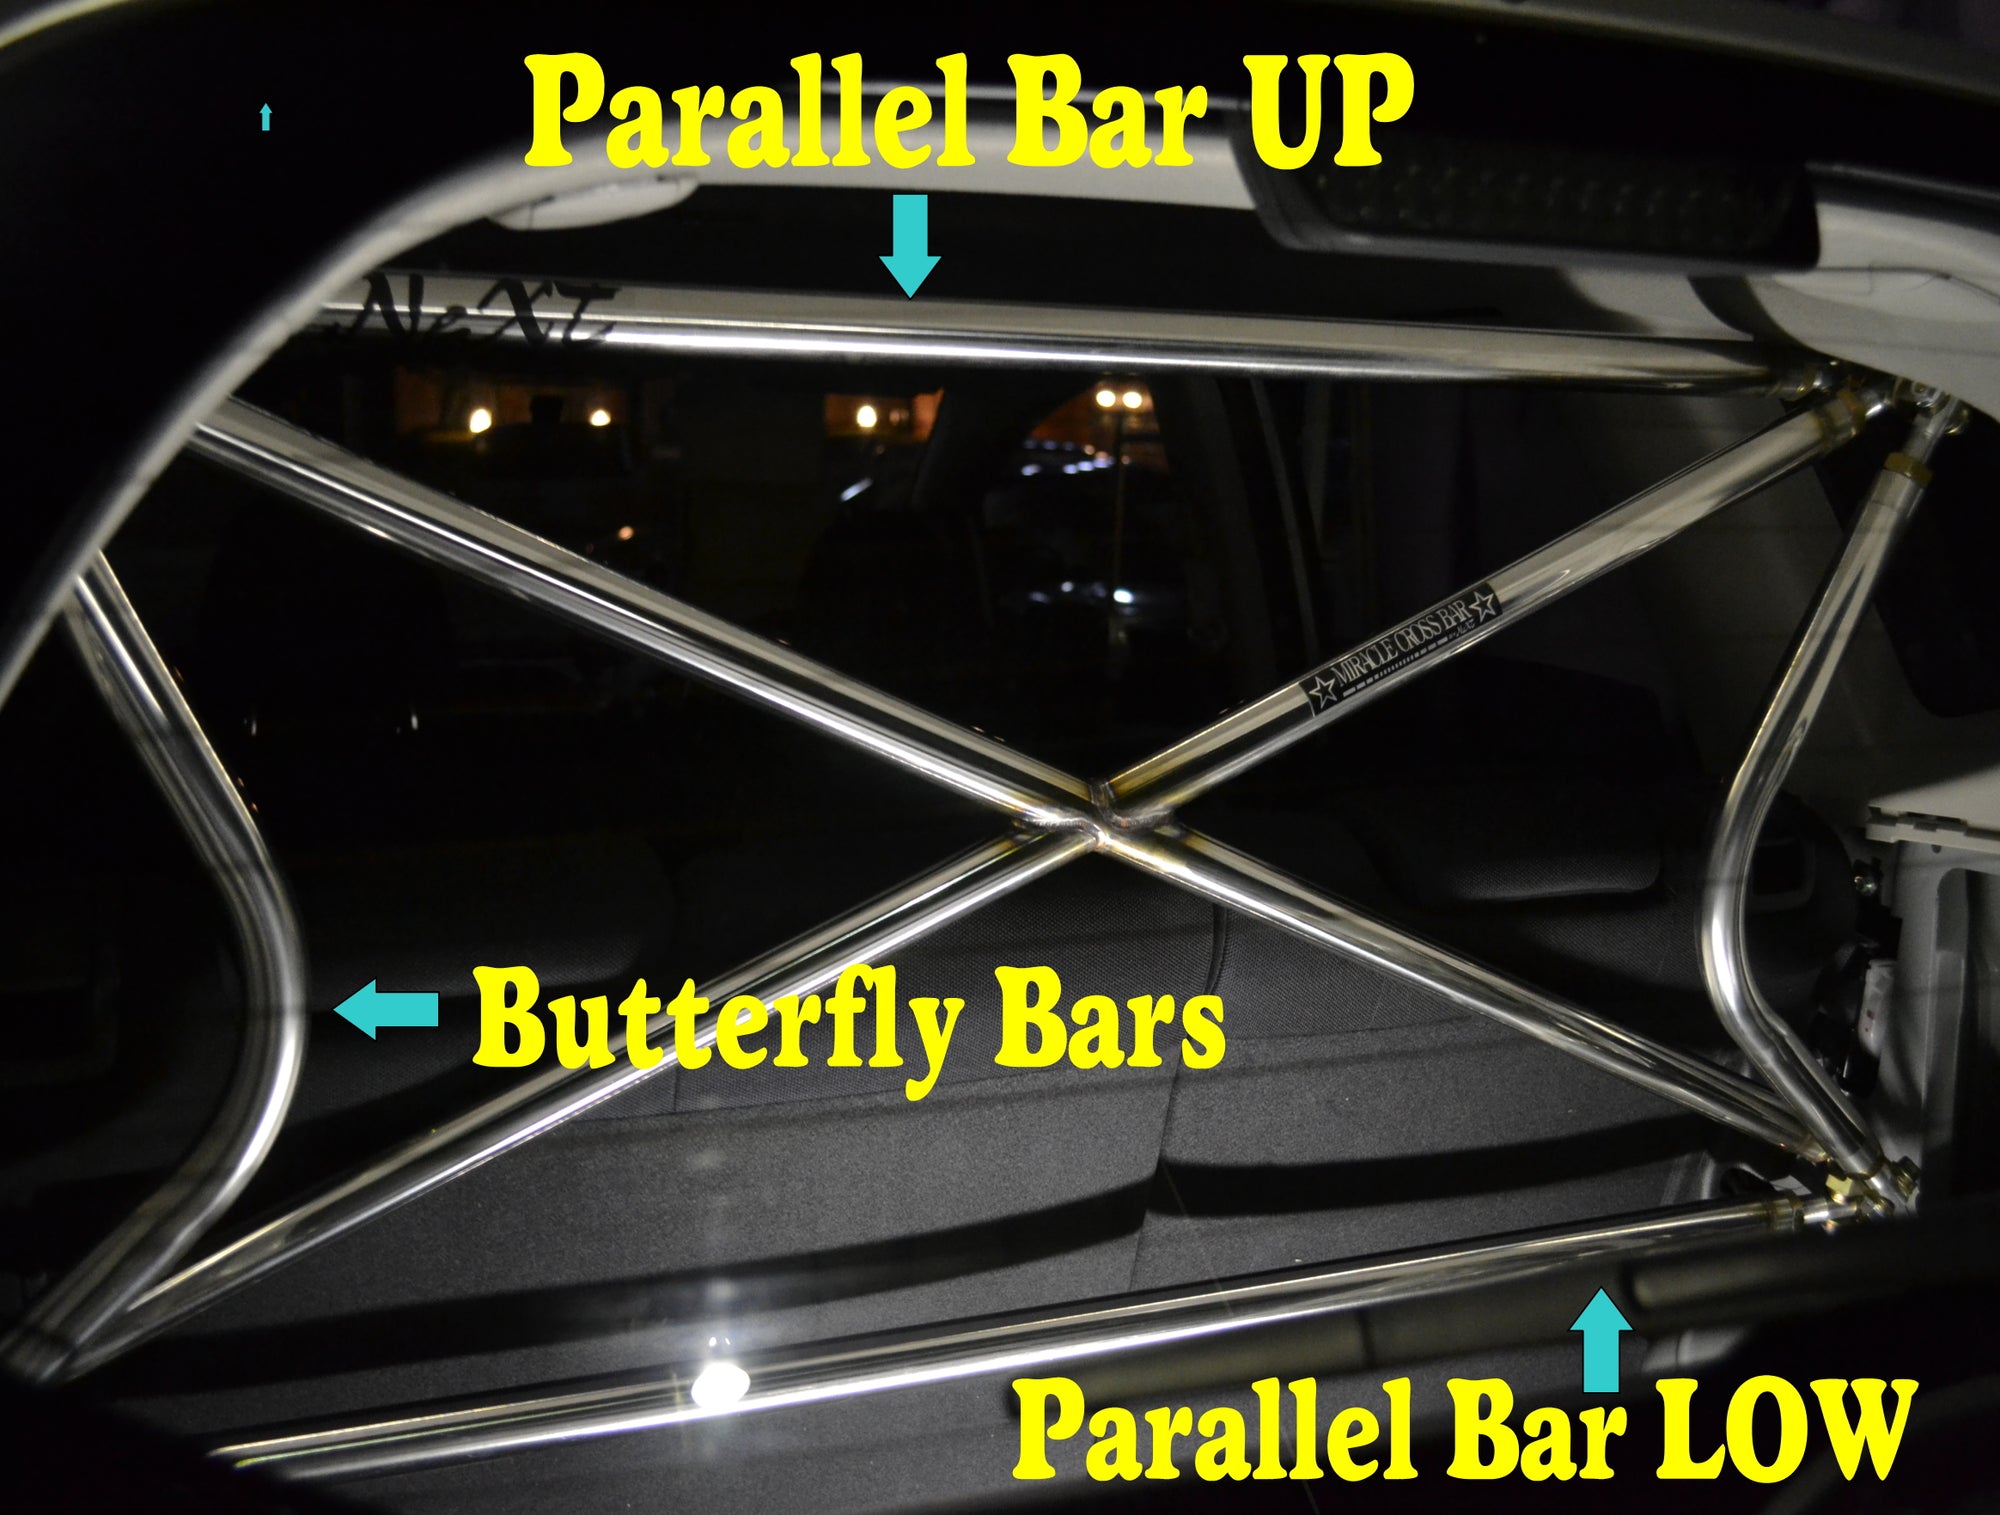 NEXT MIRACLE CROSS BAR PARALLEL BAR UP STAINLESS 32 FOR SUZUKI LAPIN NEXT-01530